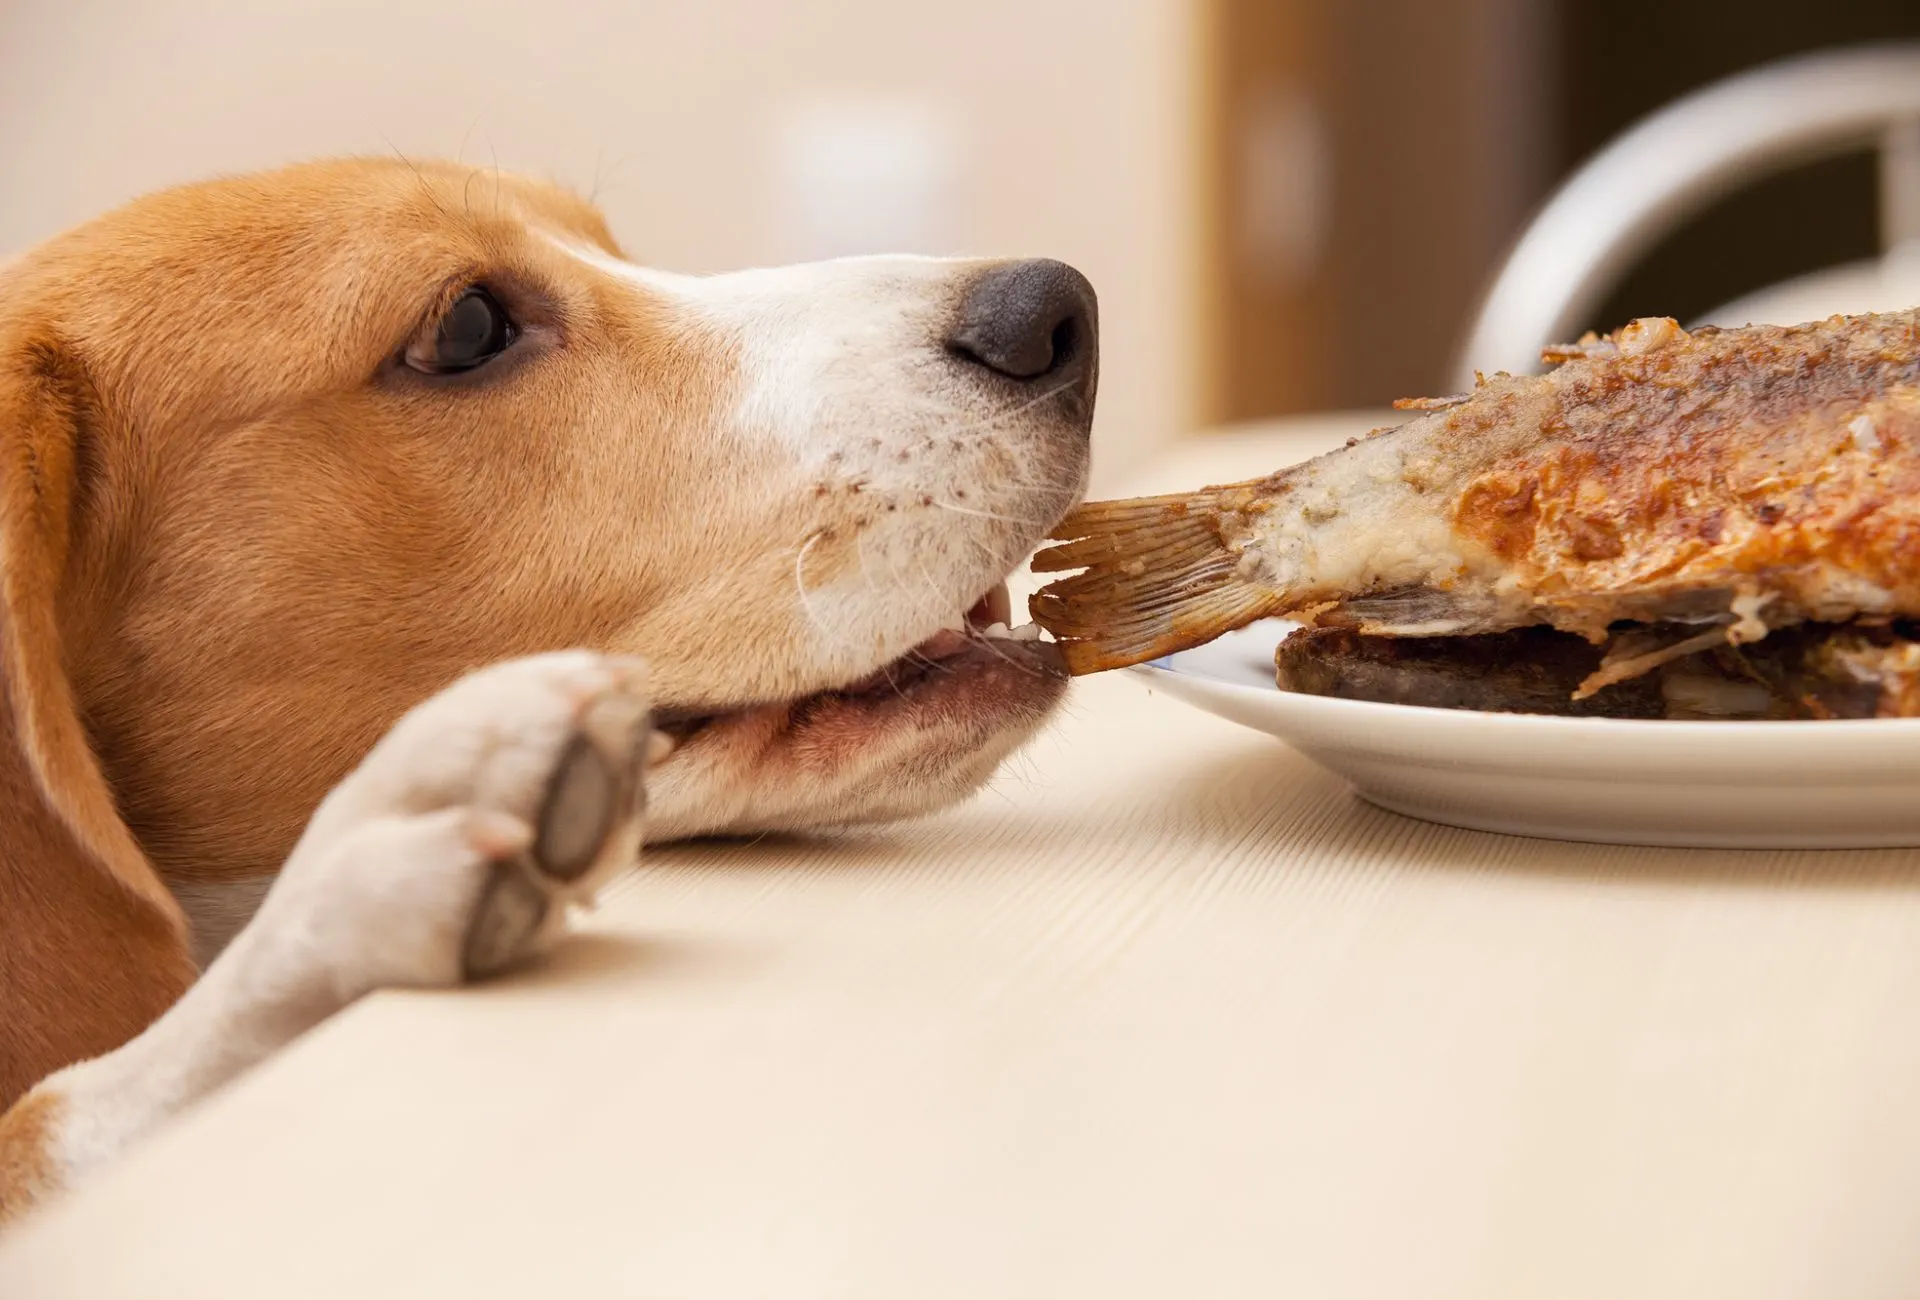 Beagle trying to steal a fried fish from the table.